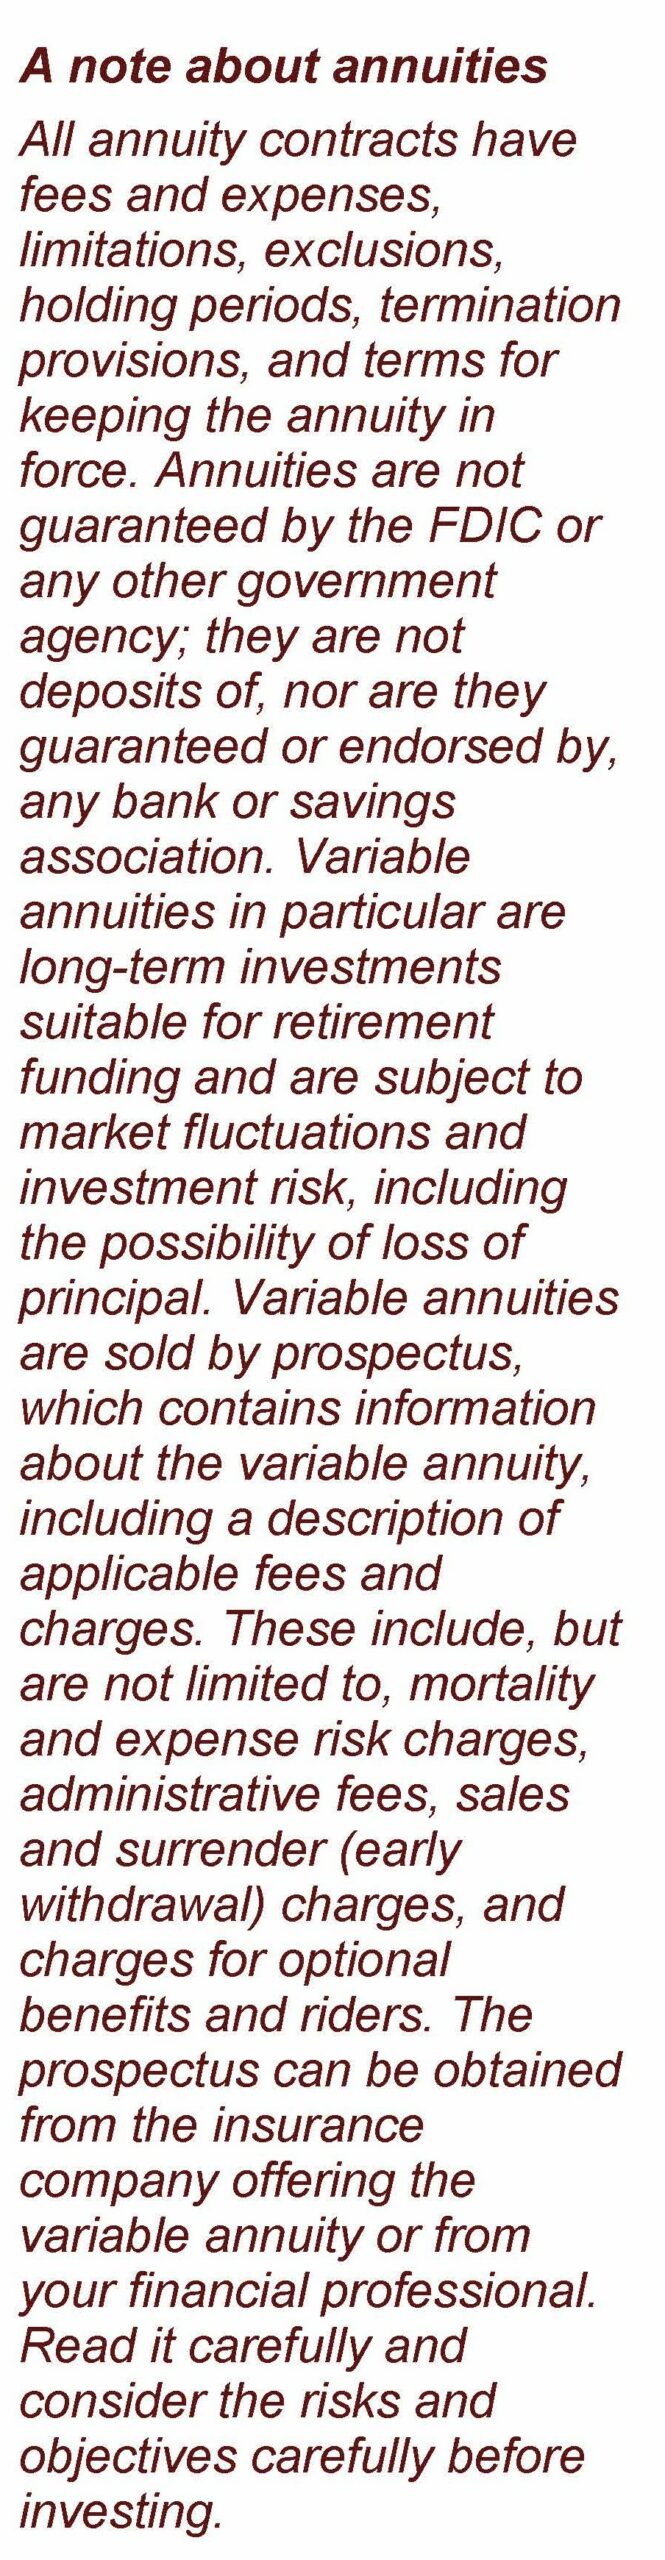 The image is text and reads: A note about annuities All annuity contracts have fees and expenses, limitations, exclusions, holding periods, termination provisions, and terms for keeping the annuity in force. Annuities are not guaranteed by the FDIC or any other government agency; they are not deposits of, nor are they guaranteed or endorsed by, any bank or savings association. Variable annuities in particular are long-term investments suitable for retirement funding and are subject to market fluctuations and investment risk, including the possibility of loss of principal. Variable annuities are sold by prospectus, which contains information about the variable annuity, including a description of applicable fees and charges. These include, but are not limited to, mortality and expense risk charges, administrative fees, sales and surrender (early withdrawal) charges, and charges for optional benefits and riders. The prospectus can be obtained from the insurance company offering the variable annuity or from your financial professional. Read it carefully and consider the risks and objectives carefully before investing. Article title: Common Annuity Riders